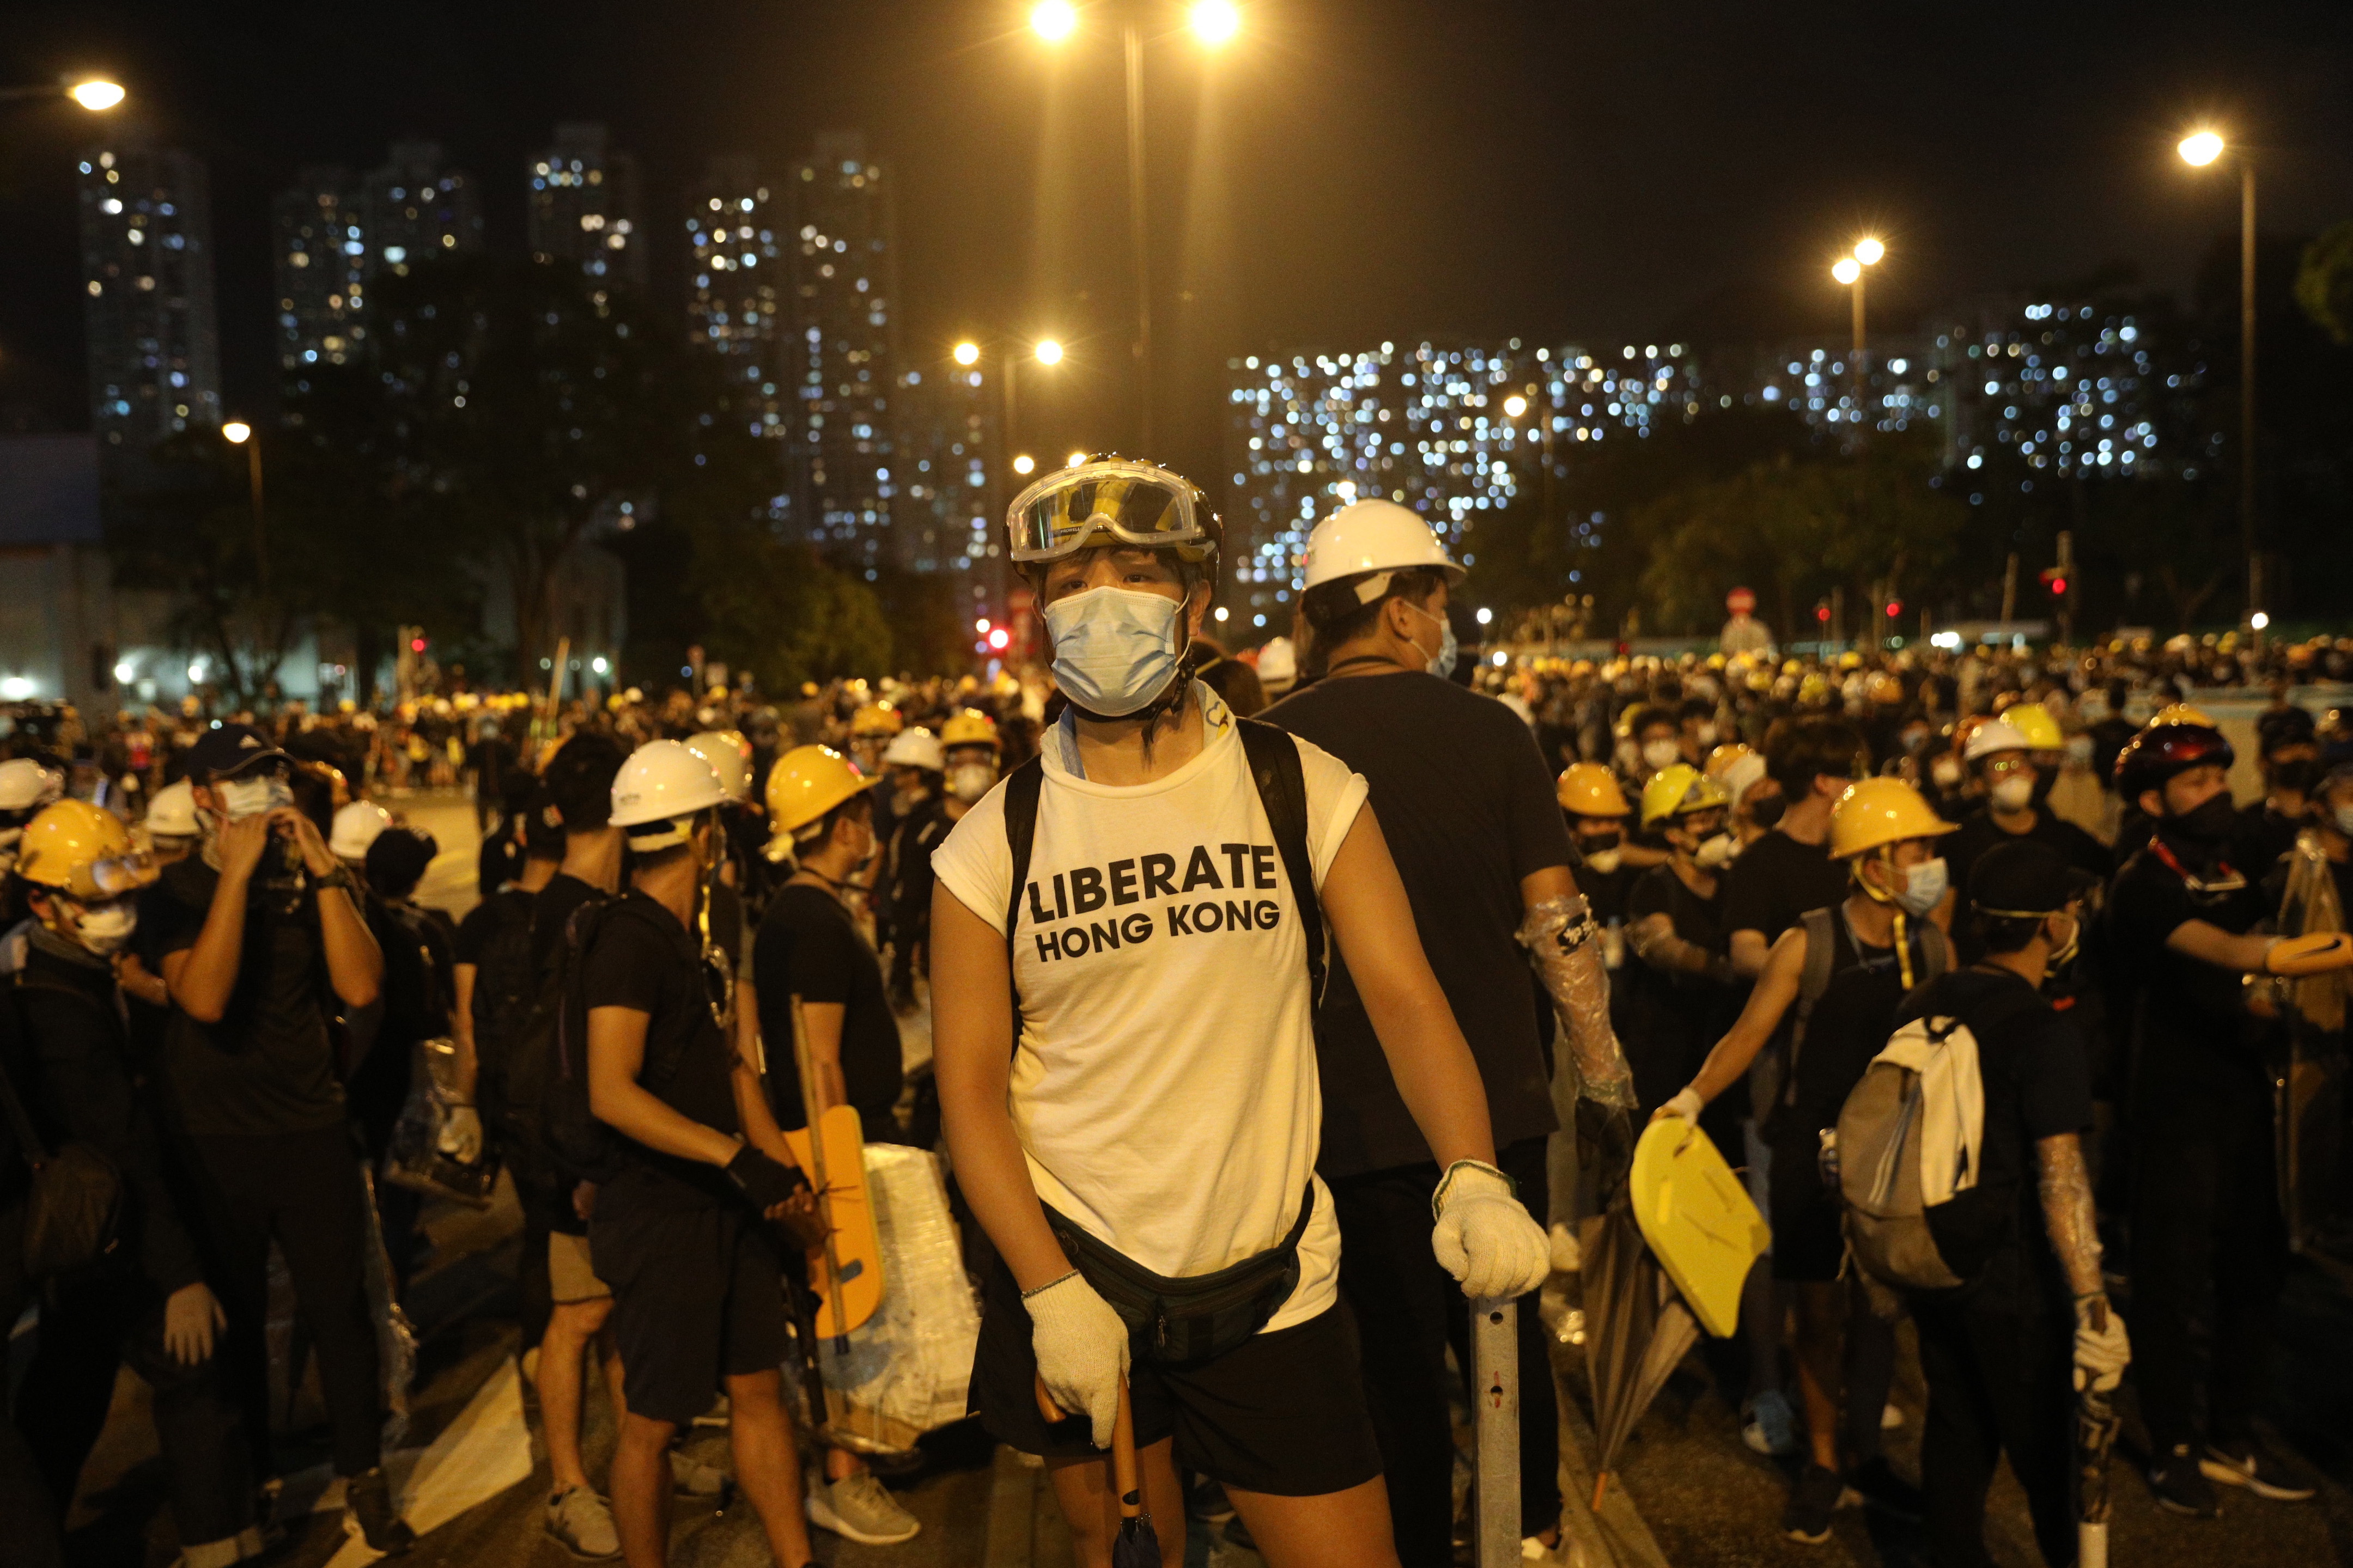 epa07716456 Anti-extradition bill protesters gather during a rally in Shatin, Hong Kong, China, 14 July 2019. Spurred by the momentum of the anti-extradition movement, the protesters are demanding the complete withdrawal of the extradition bill, which would have allowed the transfer of fugitives to mainland China, and unconditional release of all arrested protesters among other demands.  EPA/JEROME FAVRE